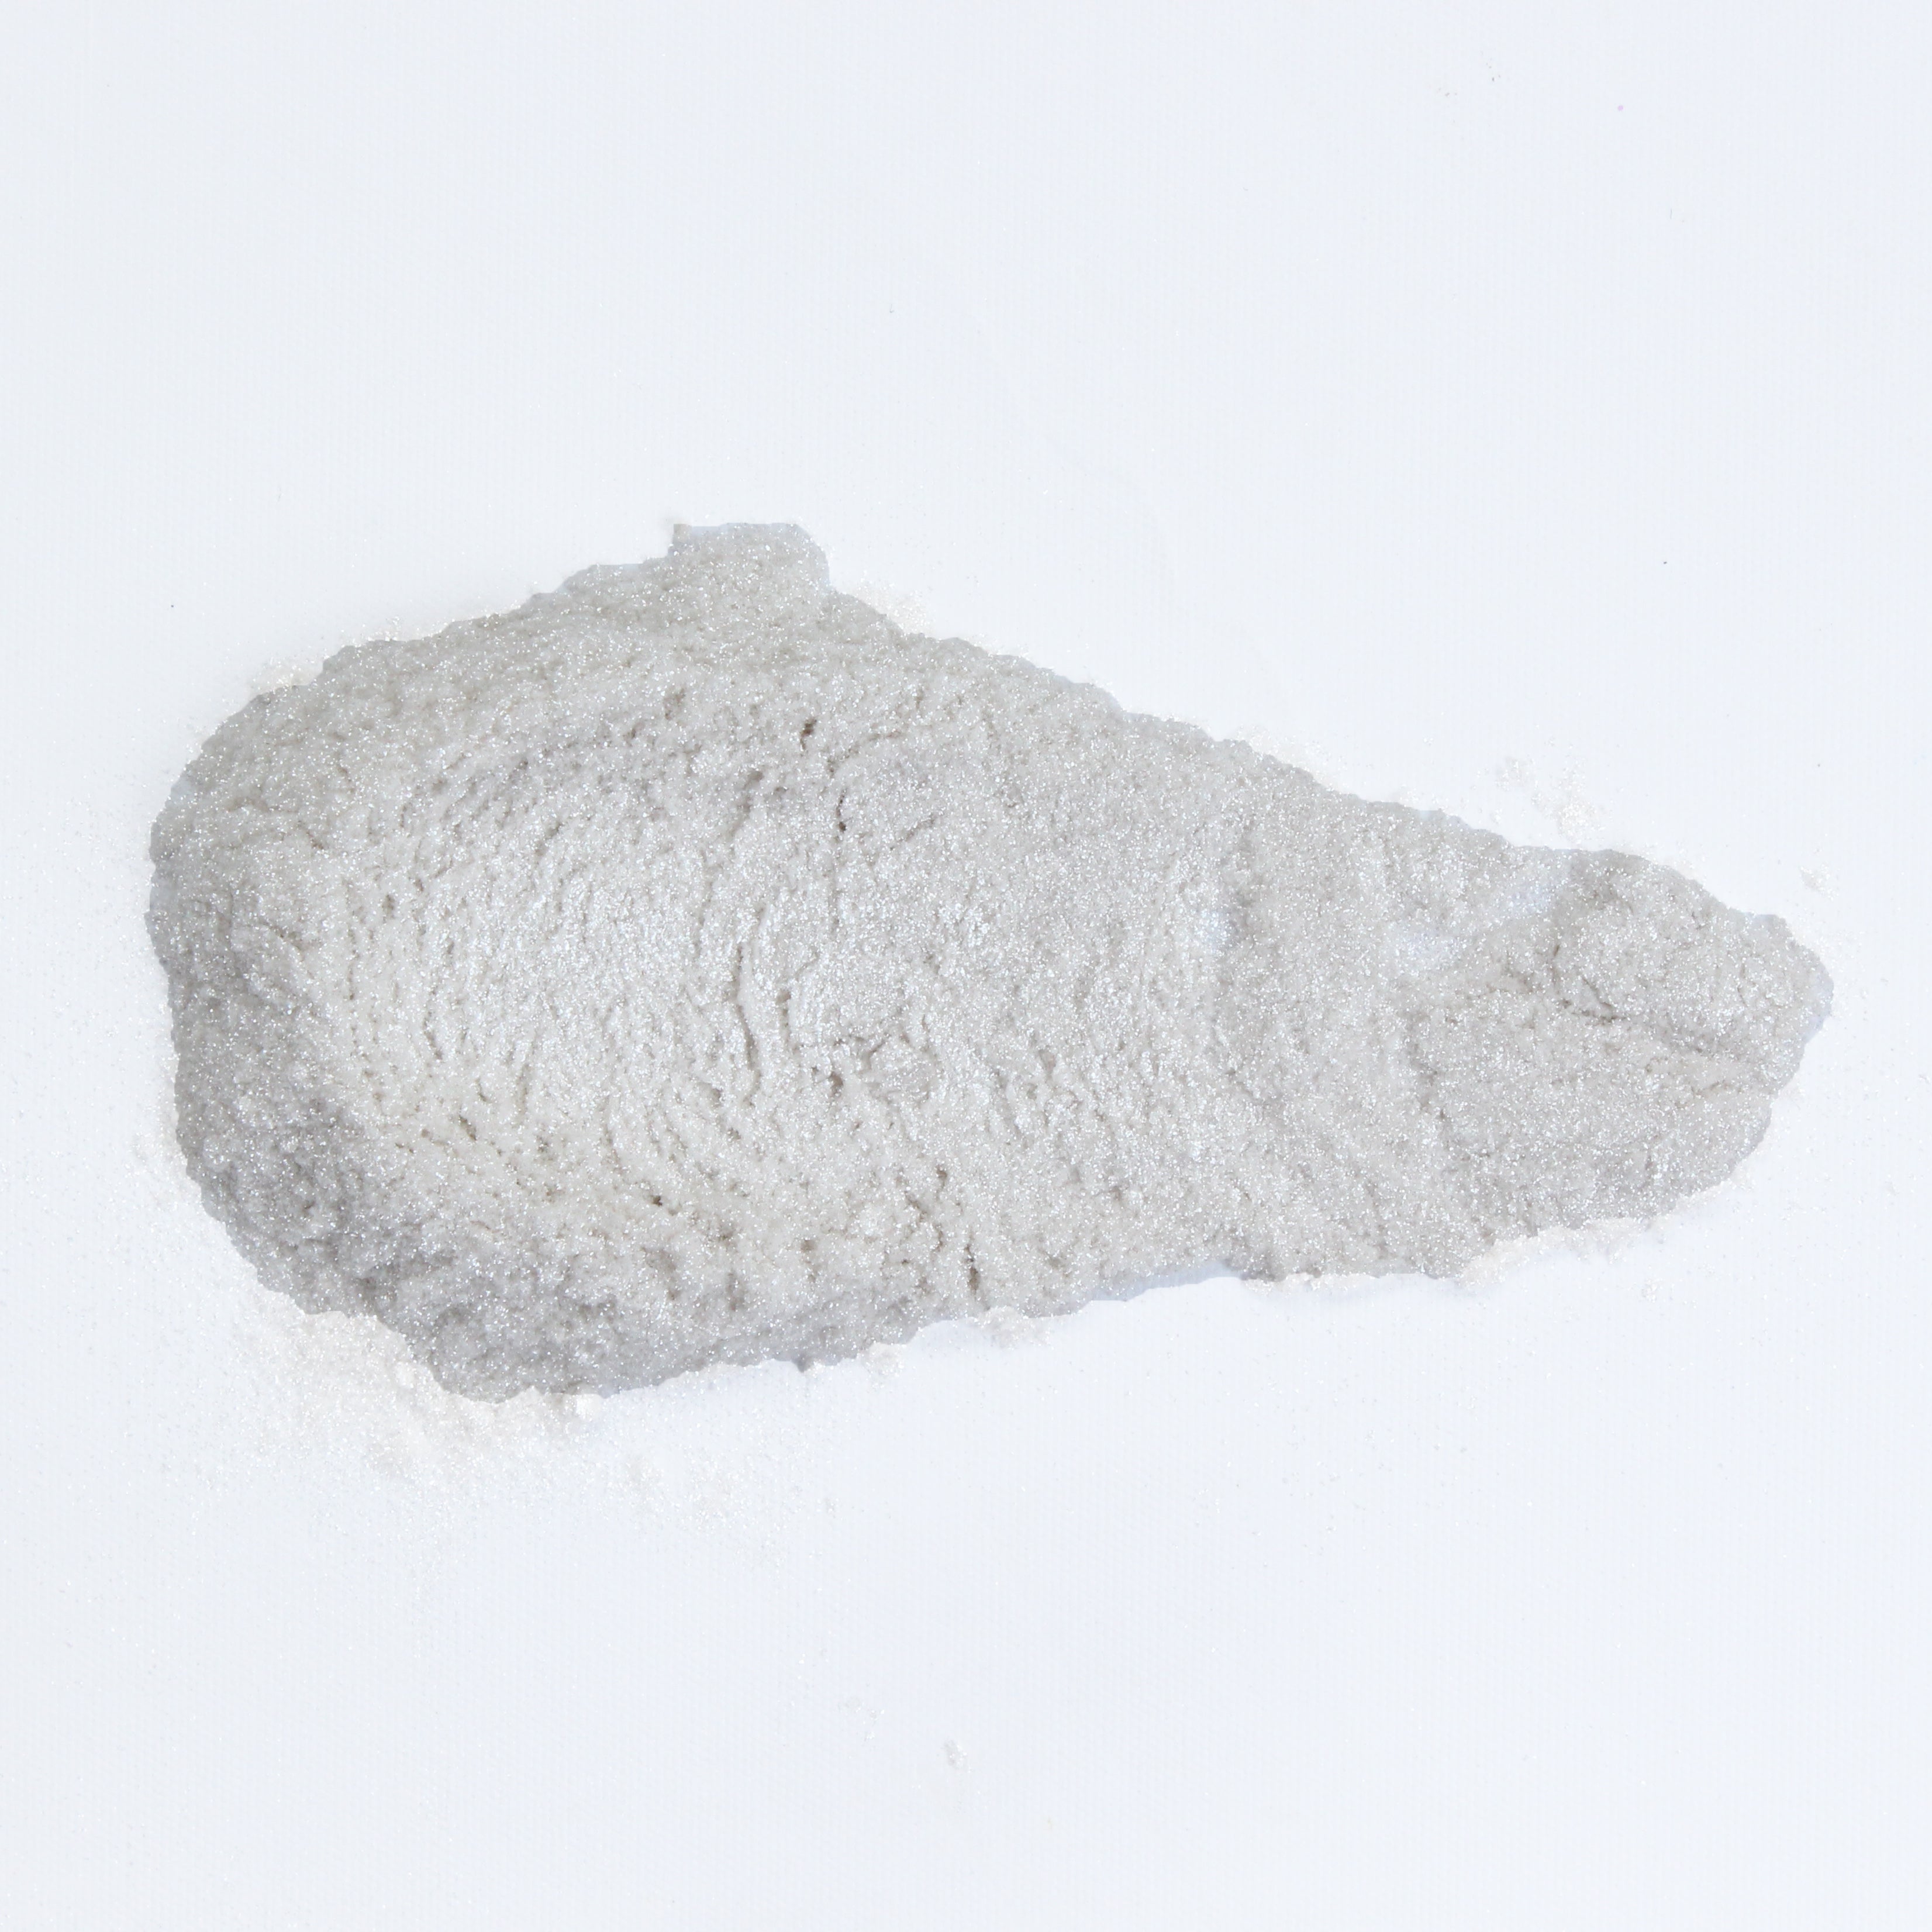 Mica Powder Pearly Dust 10Grams